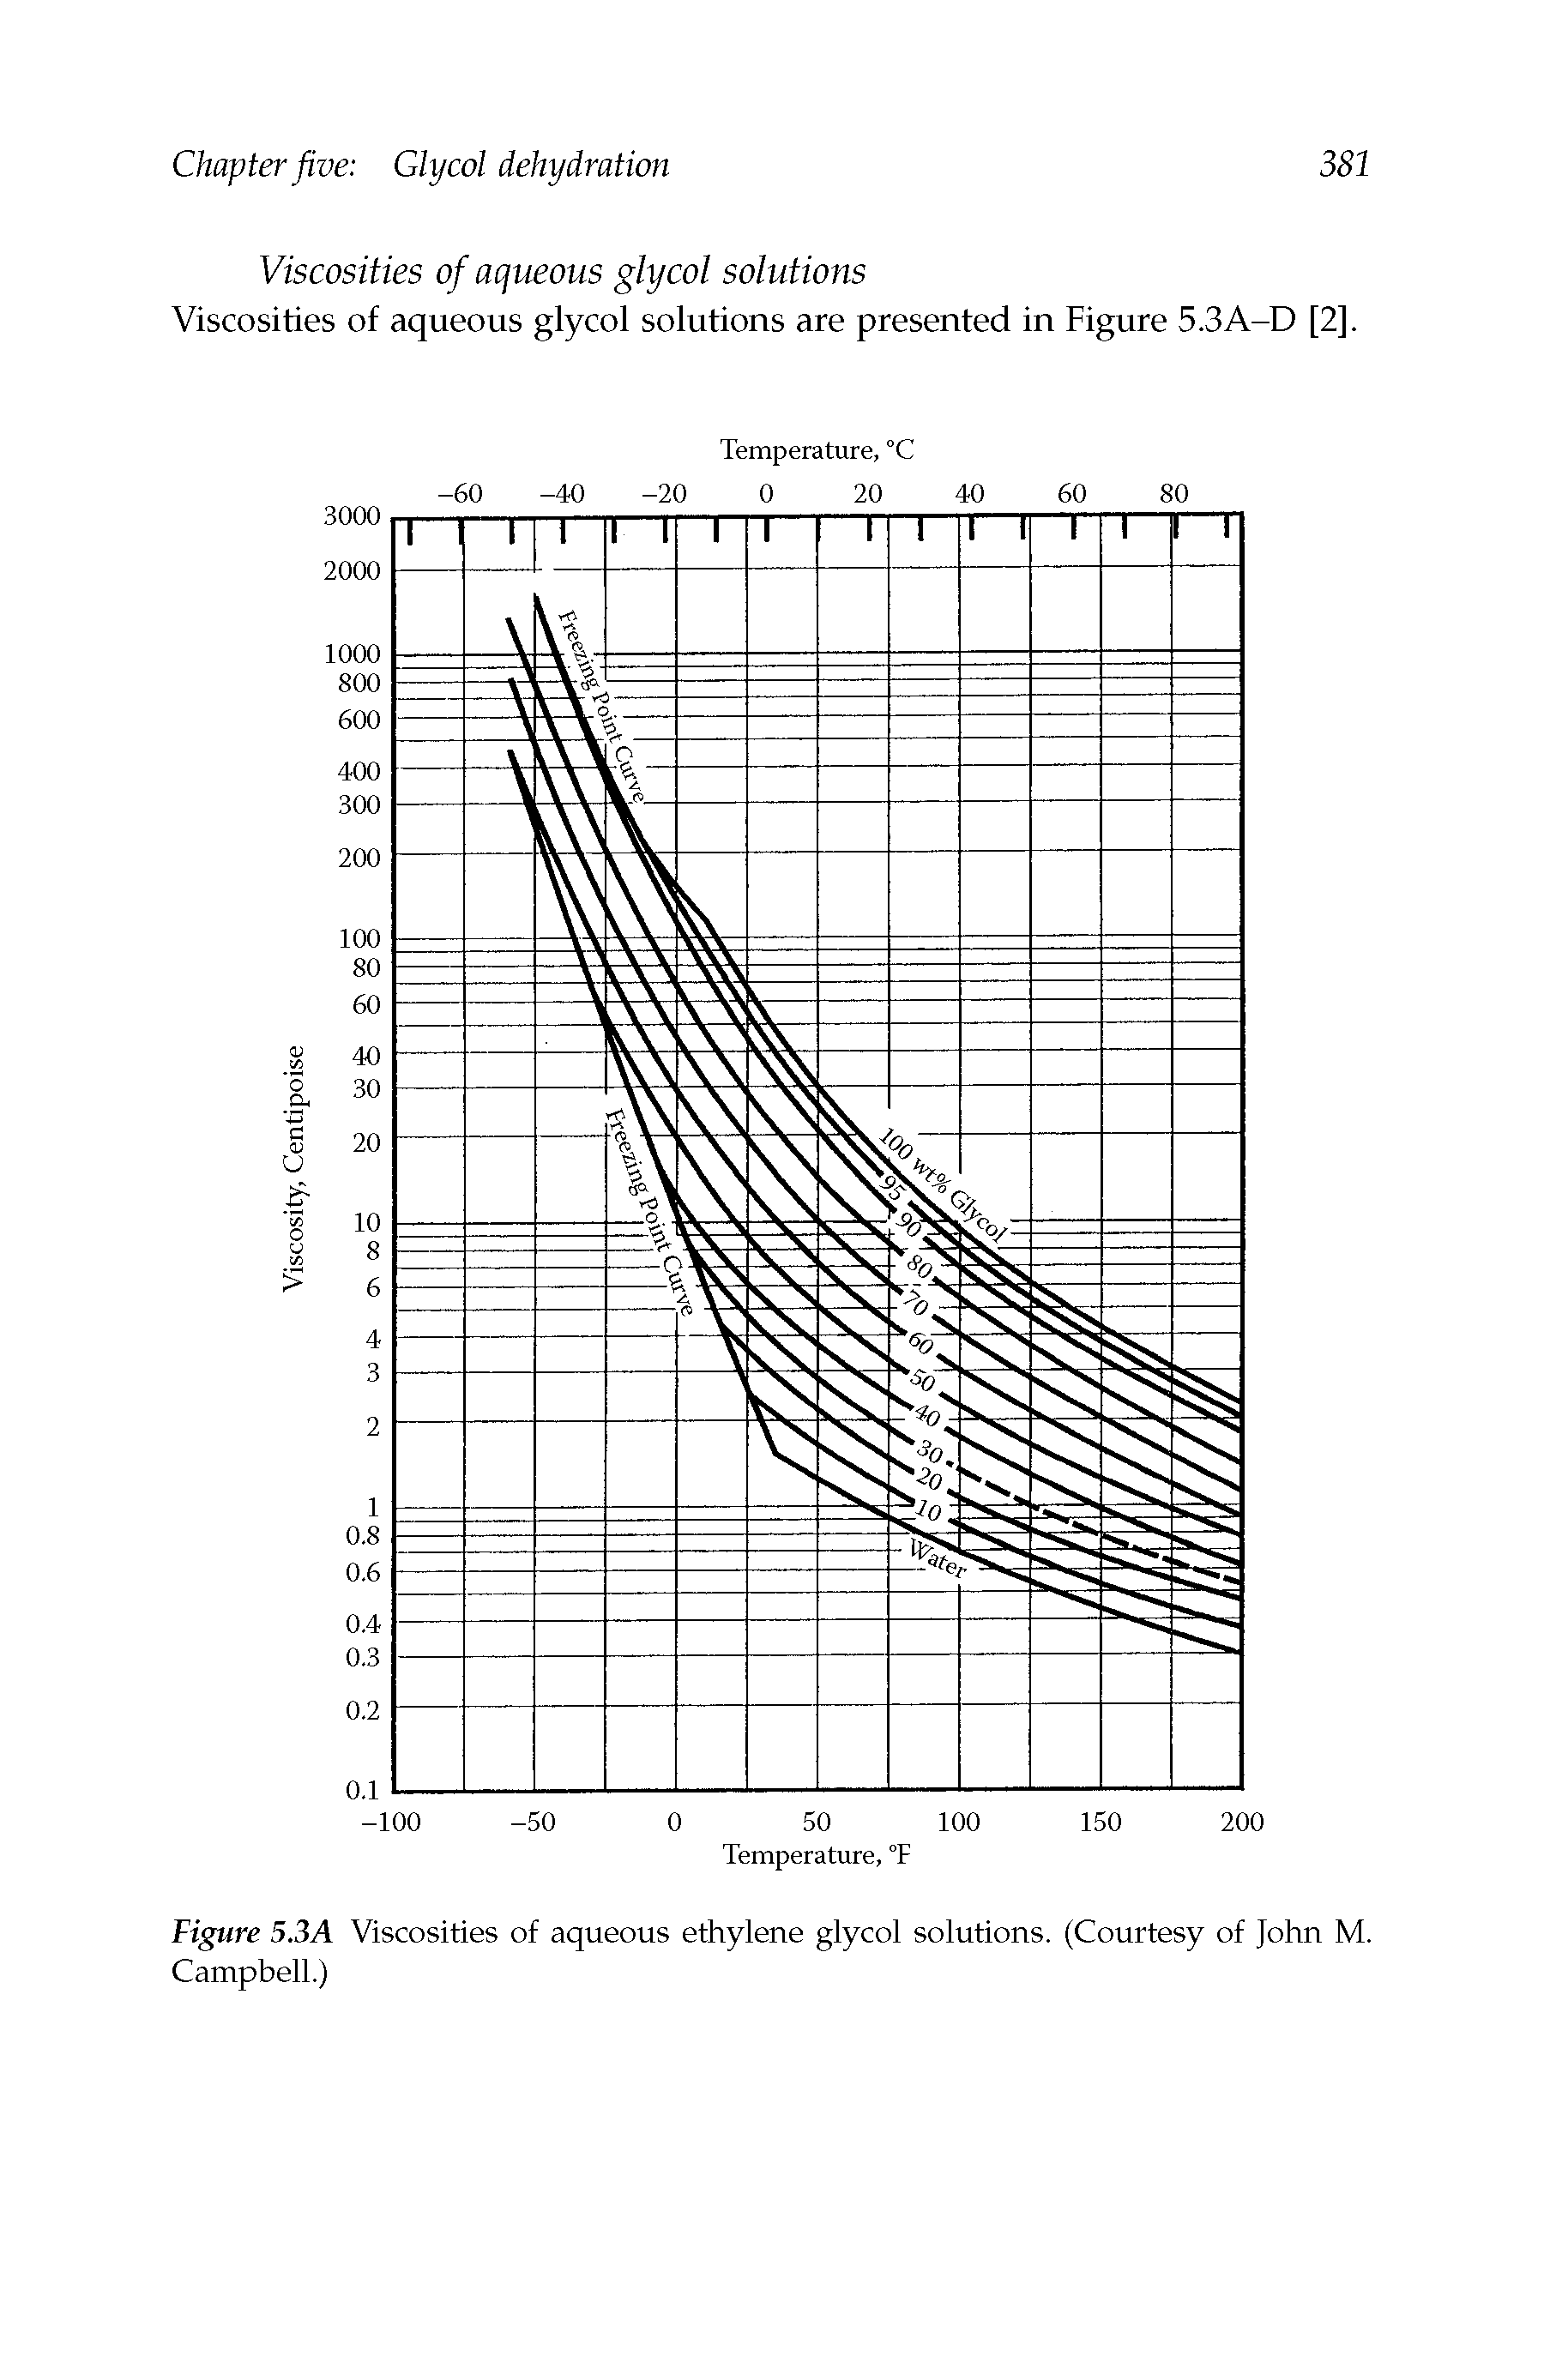 Figure 5.3A Viscosities of aqueous ethylene glycol solutions. (Courtesy of John M. Campbell.)...